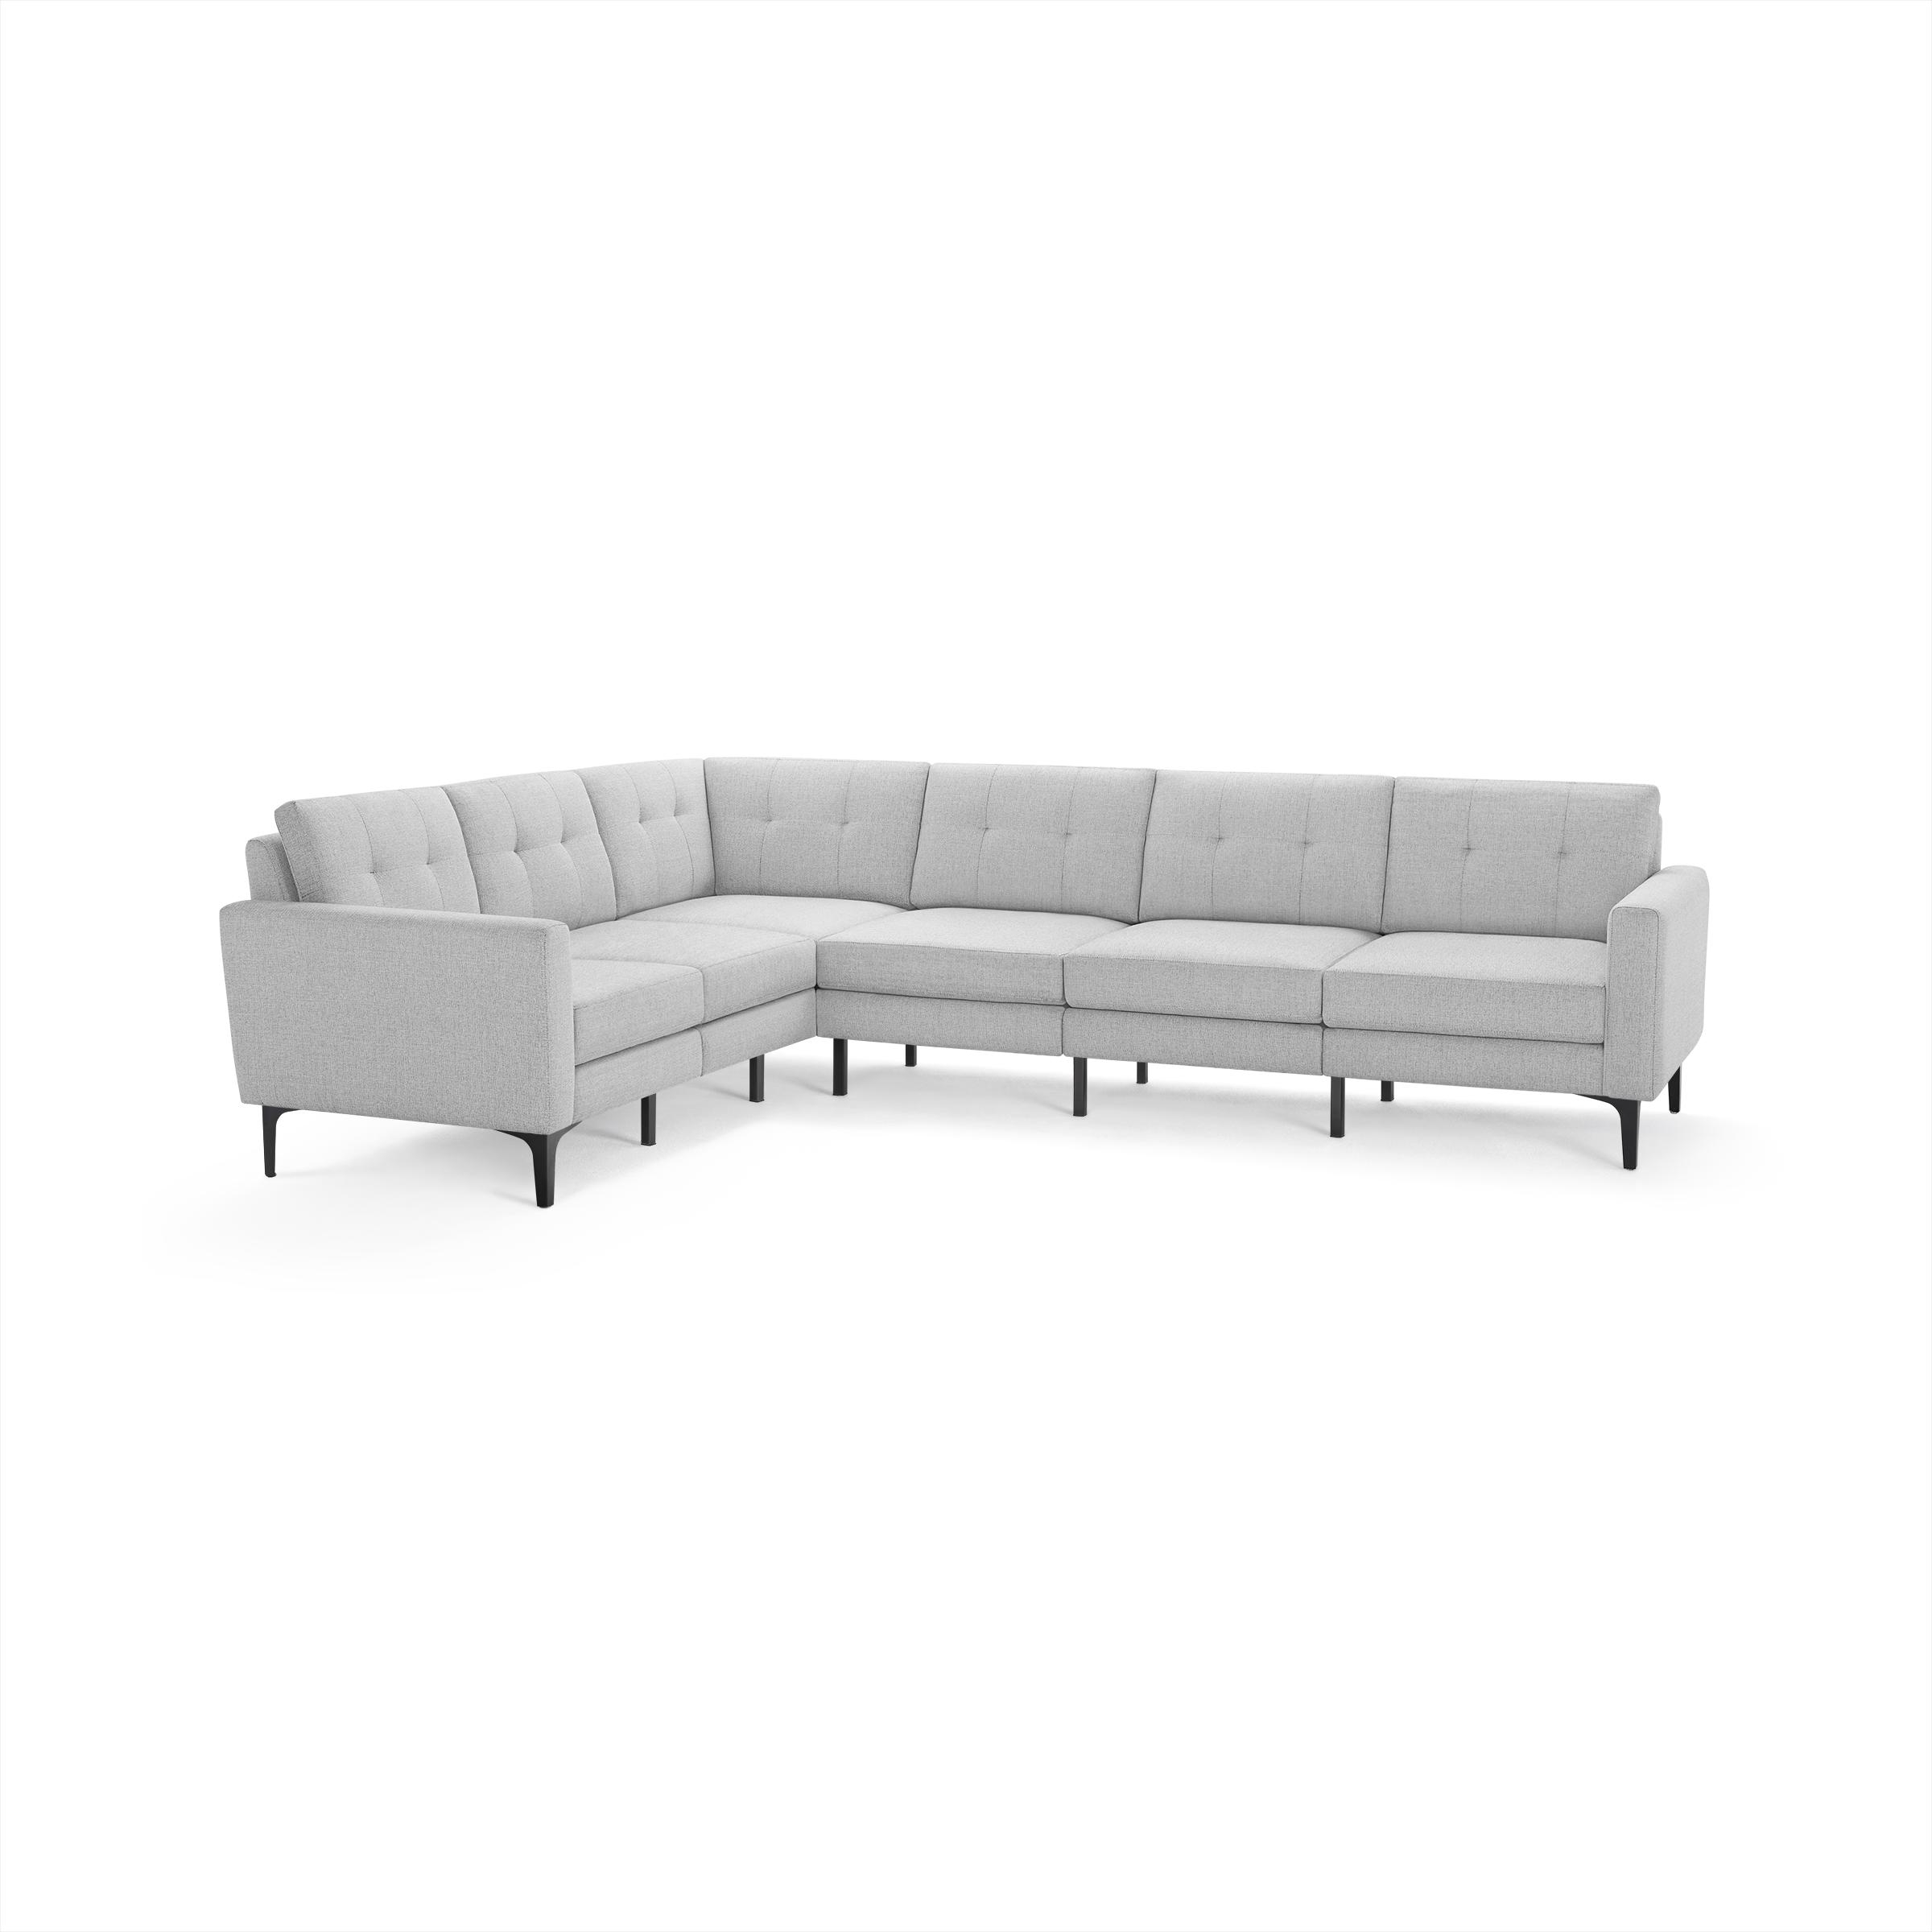 Nomad 6-Seat Corner Sectional in Crushed Gravel - Image 0